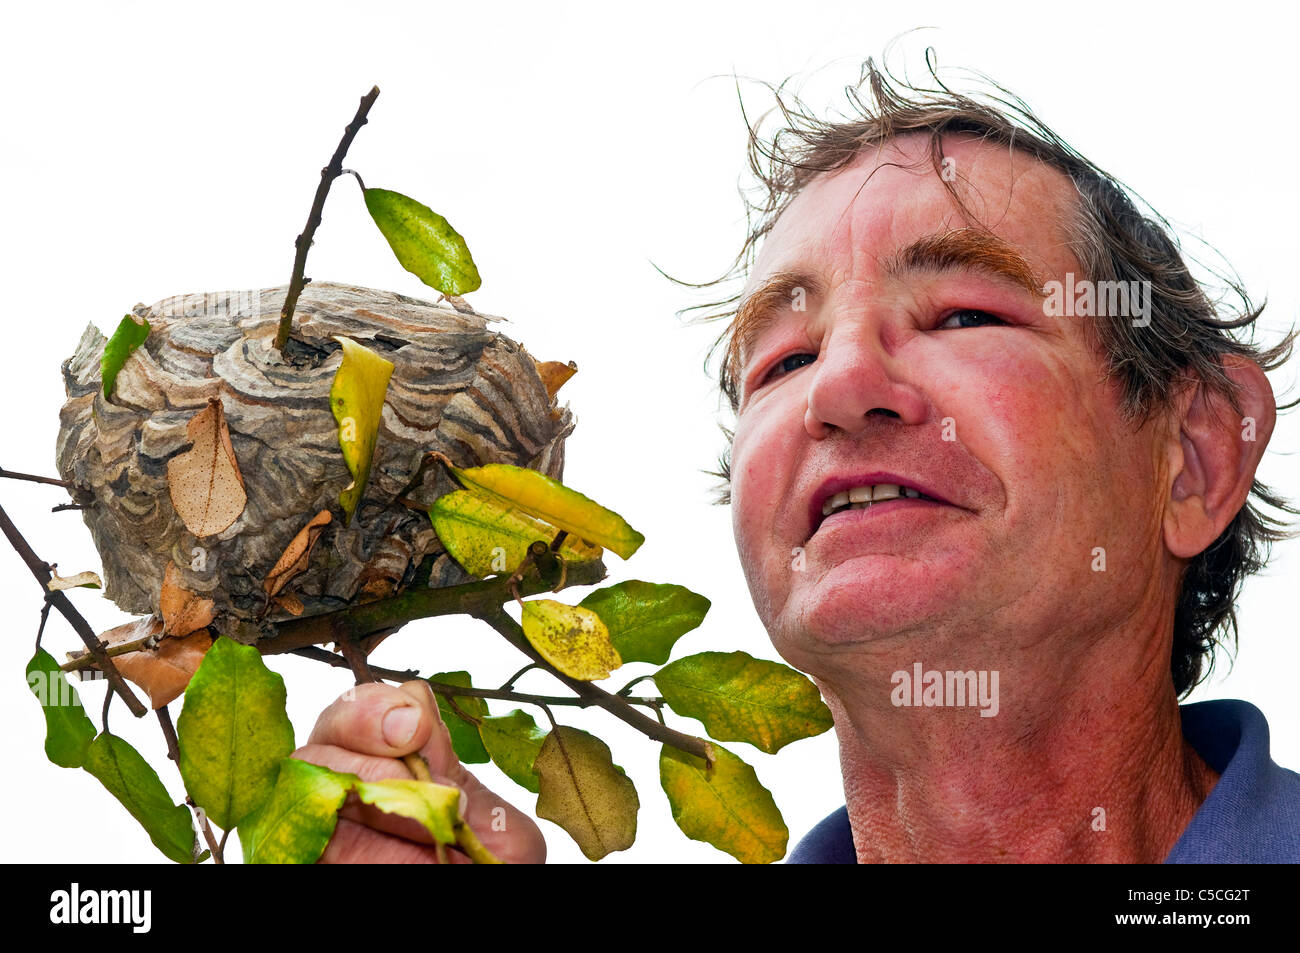 Man with wasp stings / swollen face holding wasp's nest - France. Stock Photo